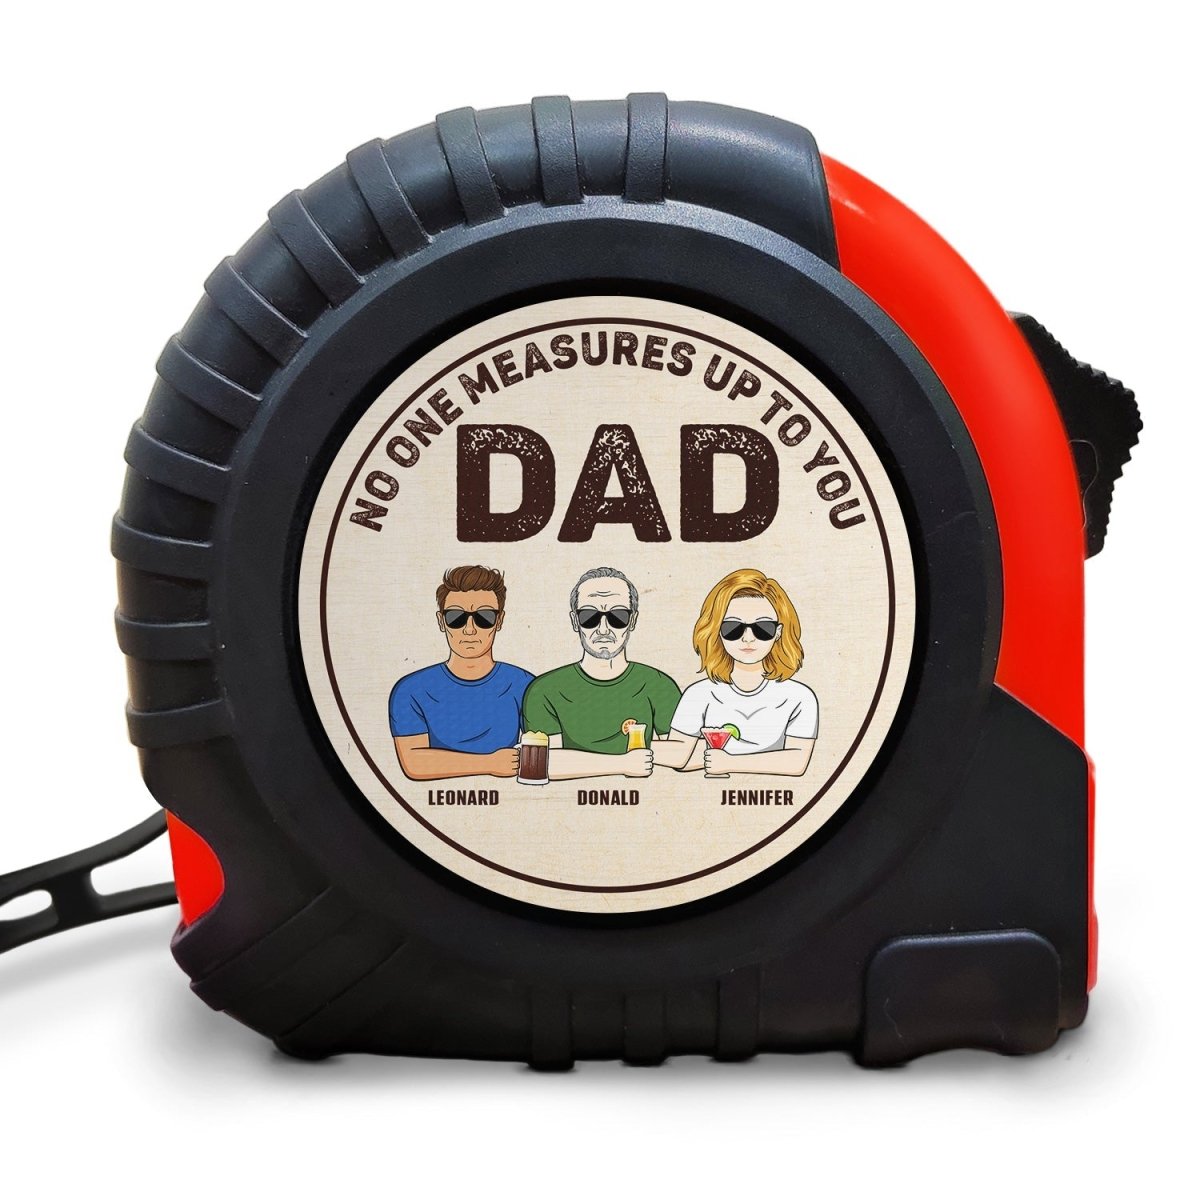 Family - Dad No One Measures Up To You - Personalized Tape Measure - The Next Custom Gift